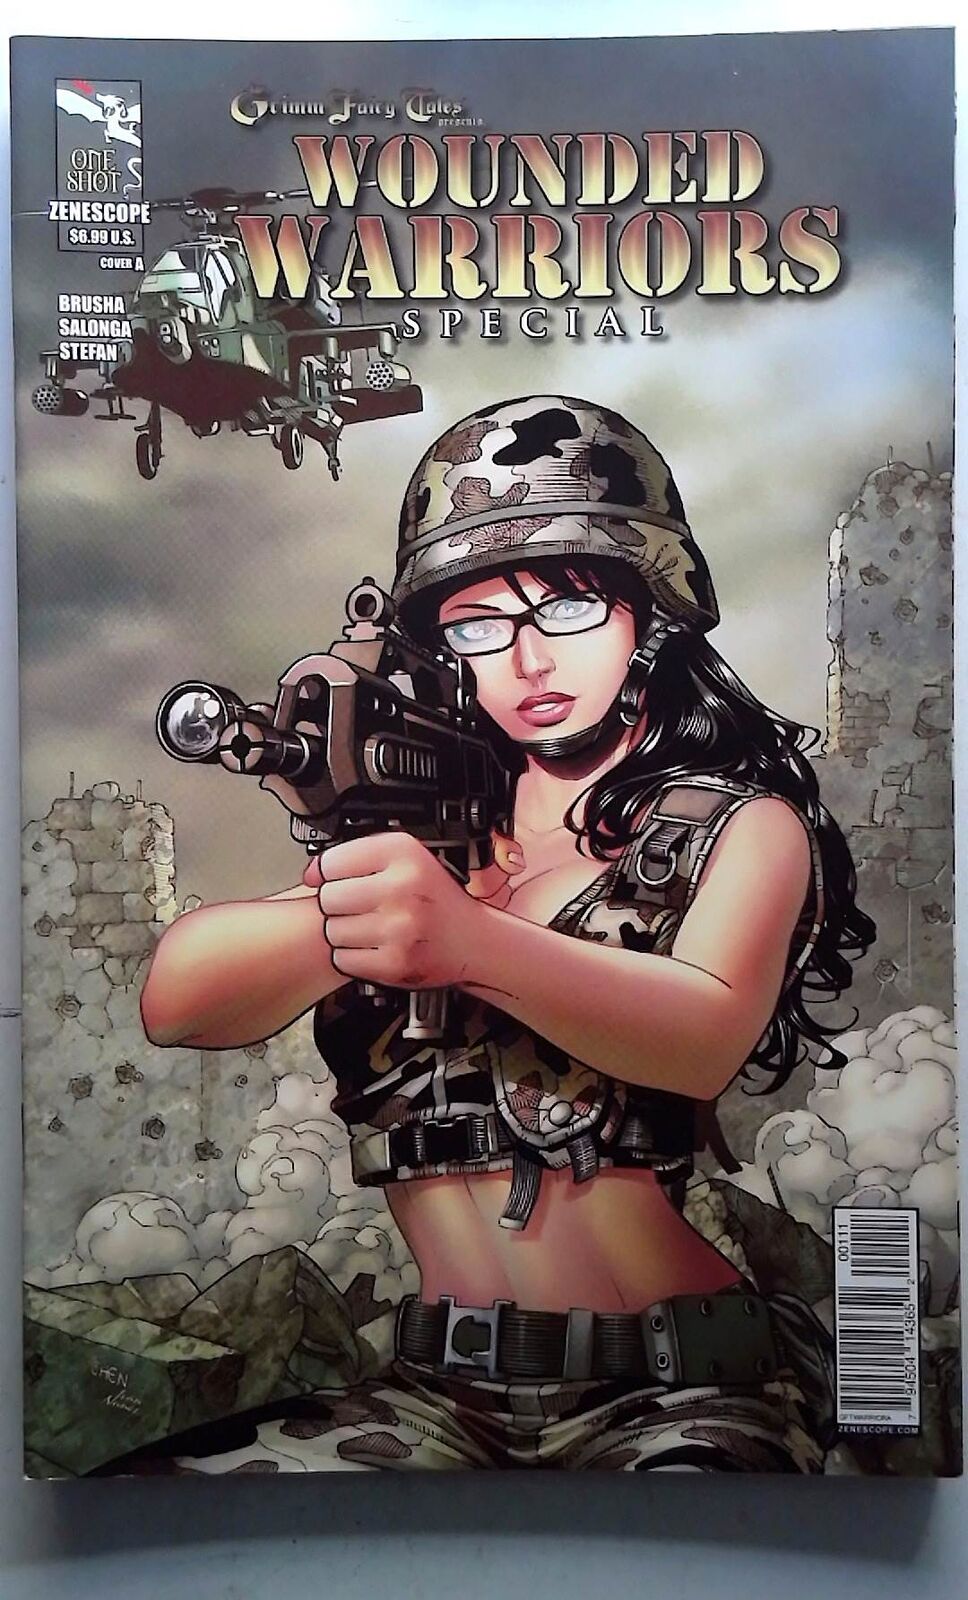 Grimm Fairy Tales presents Wounded Warriors Special #1 Zenescope (2013) Comic